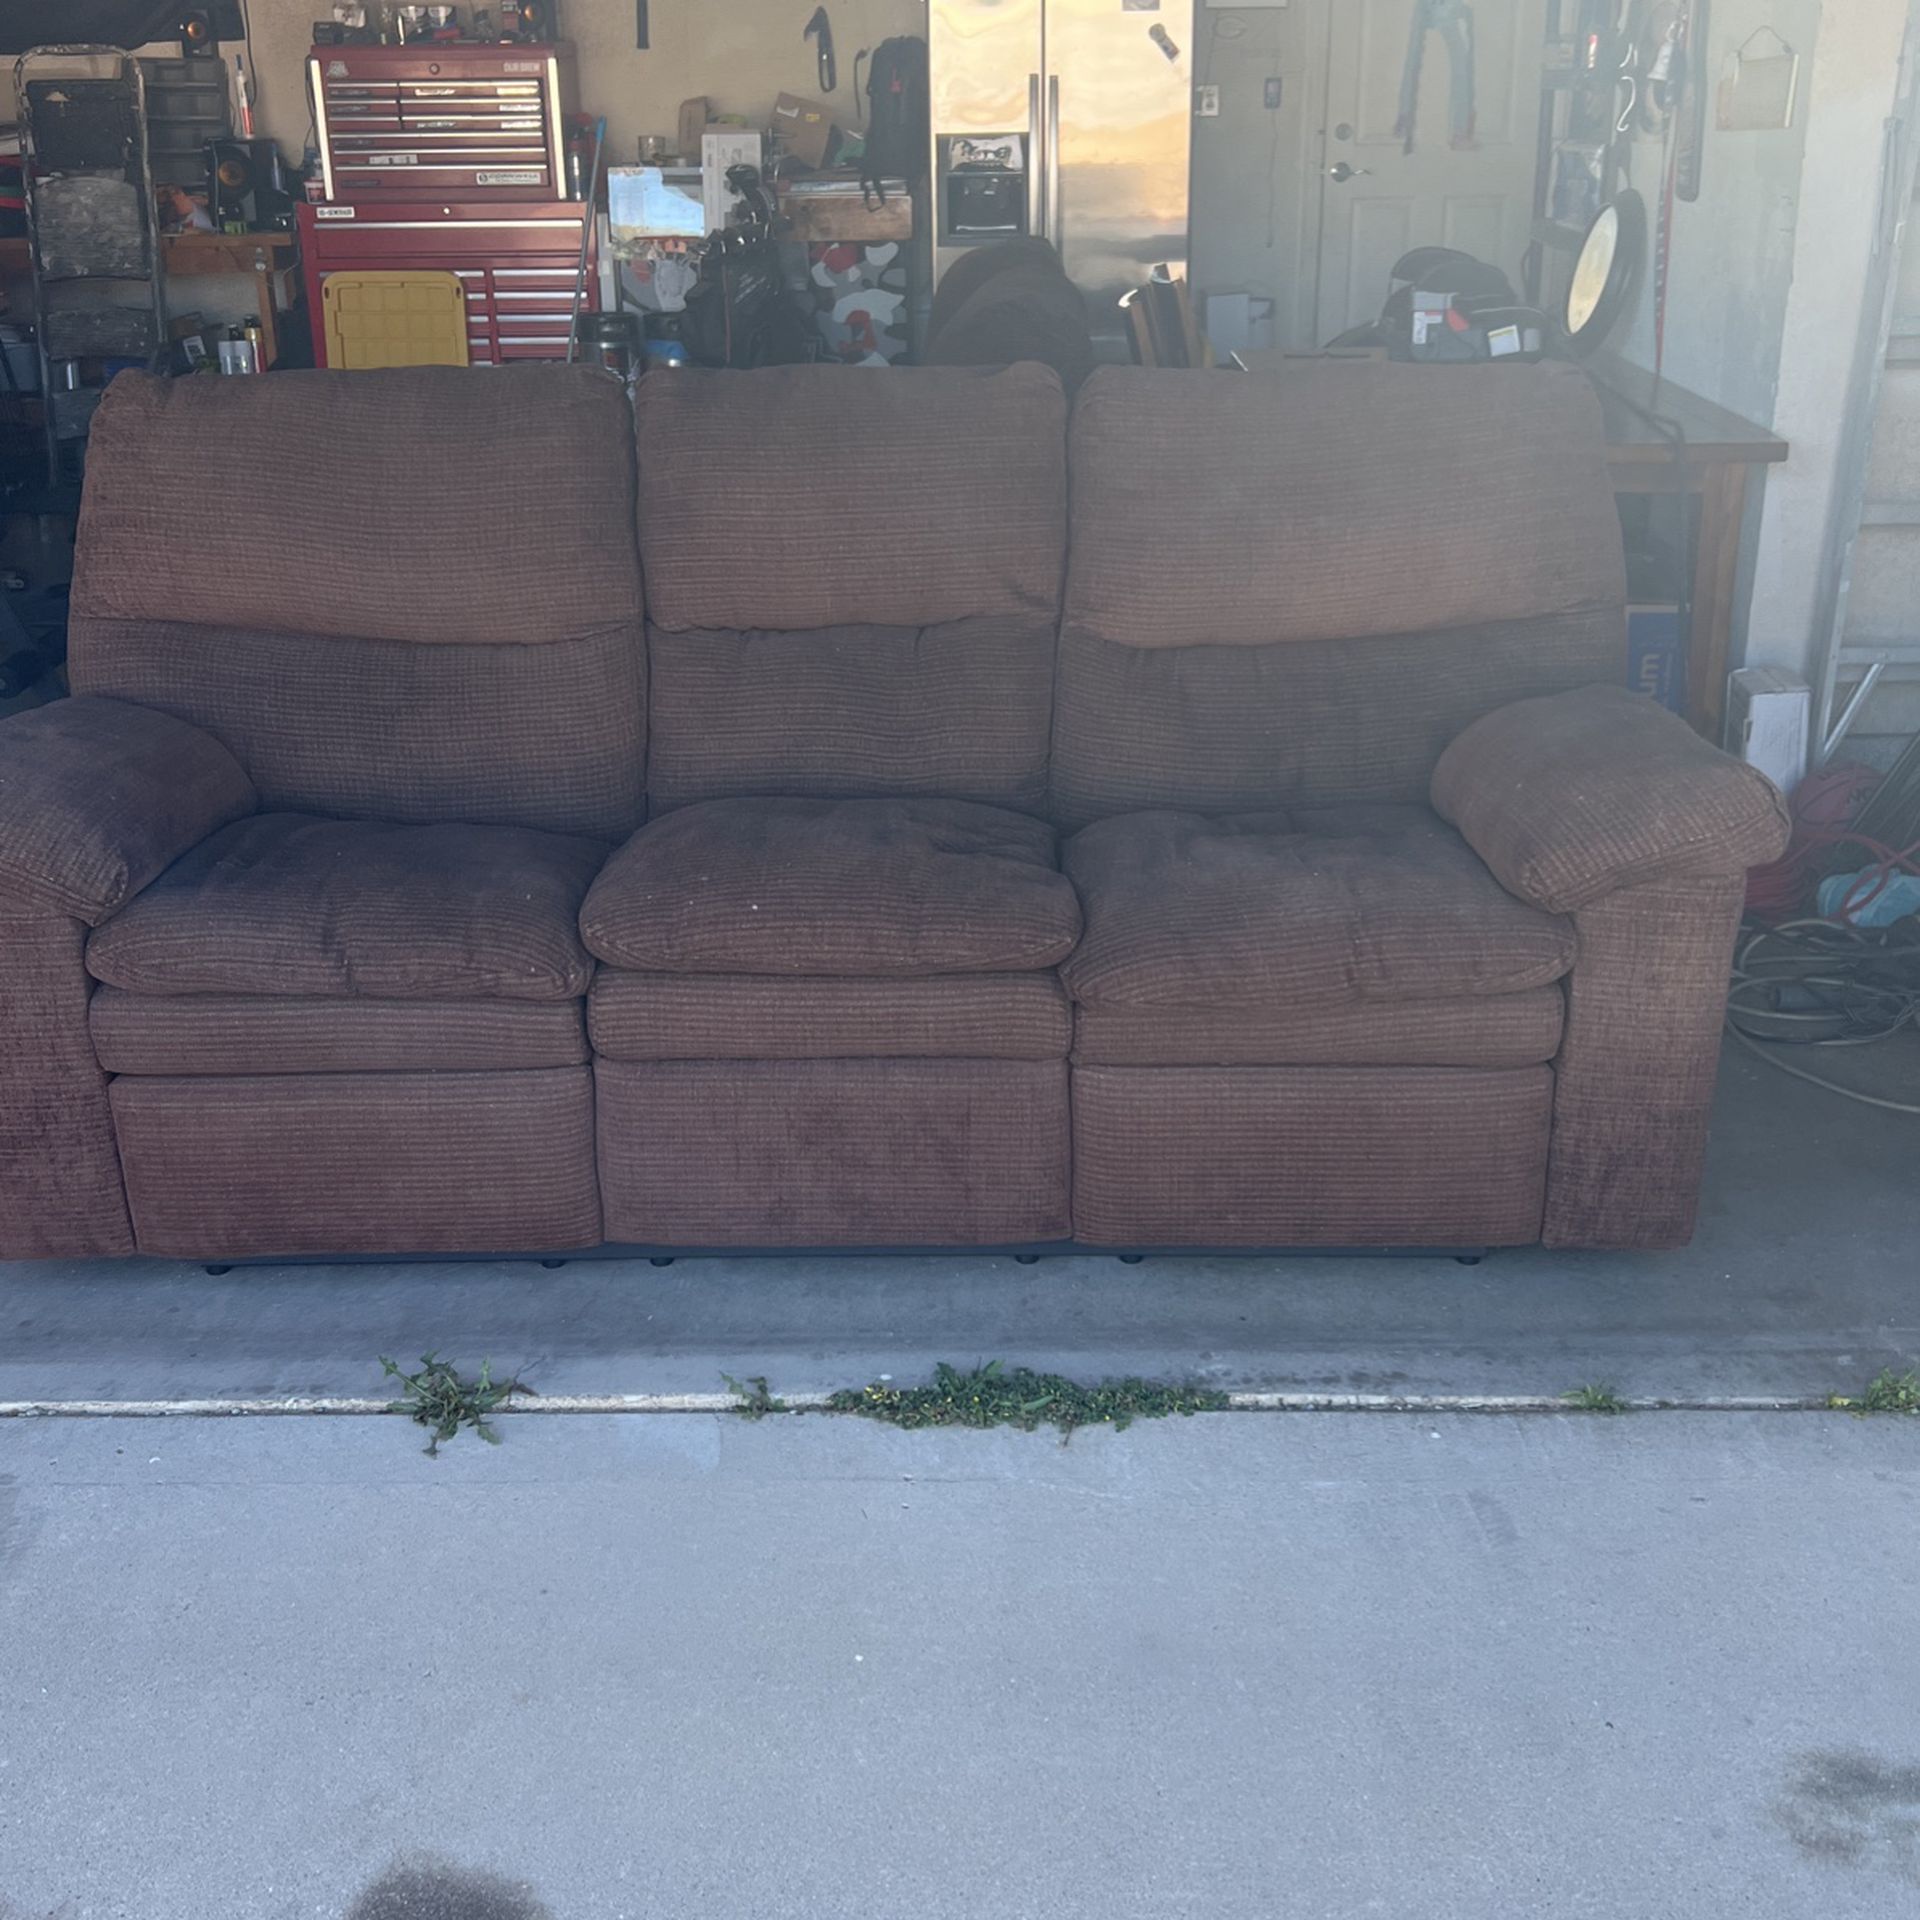 Couch With Recliners And 2 Additional Recliners